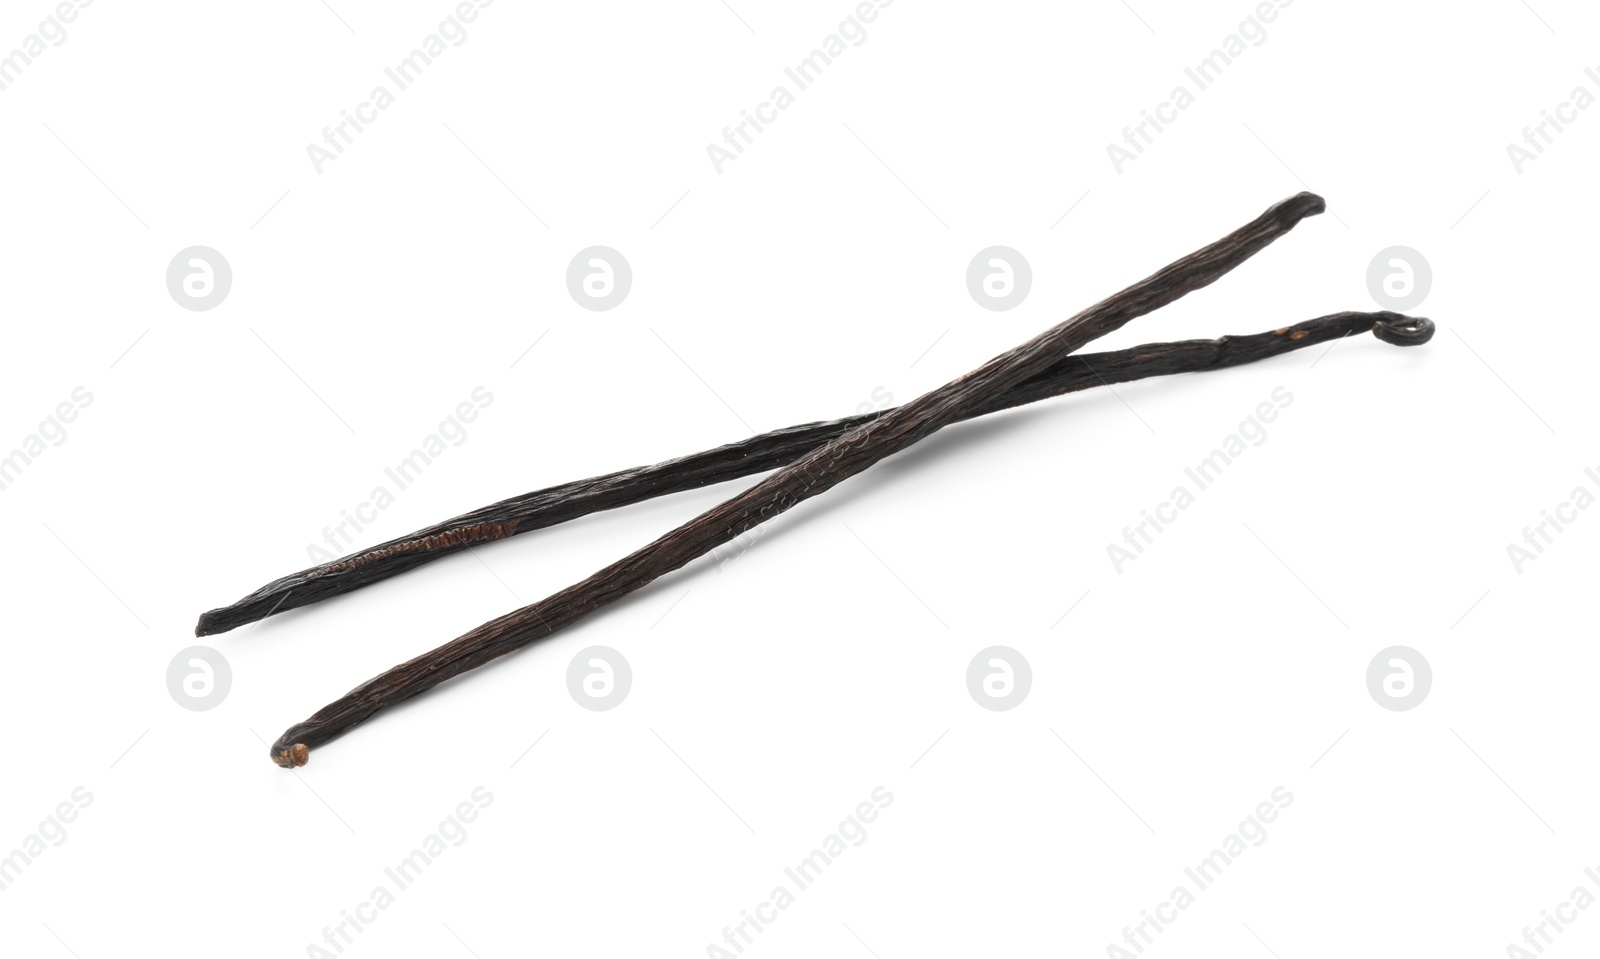 Photo of Two aromatic vanilla pods isolated on white